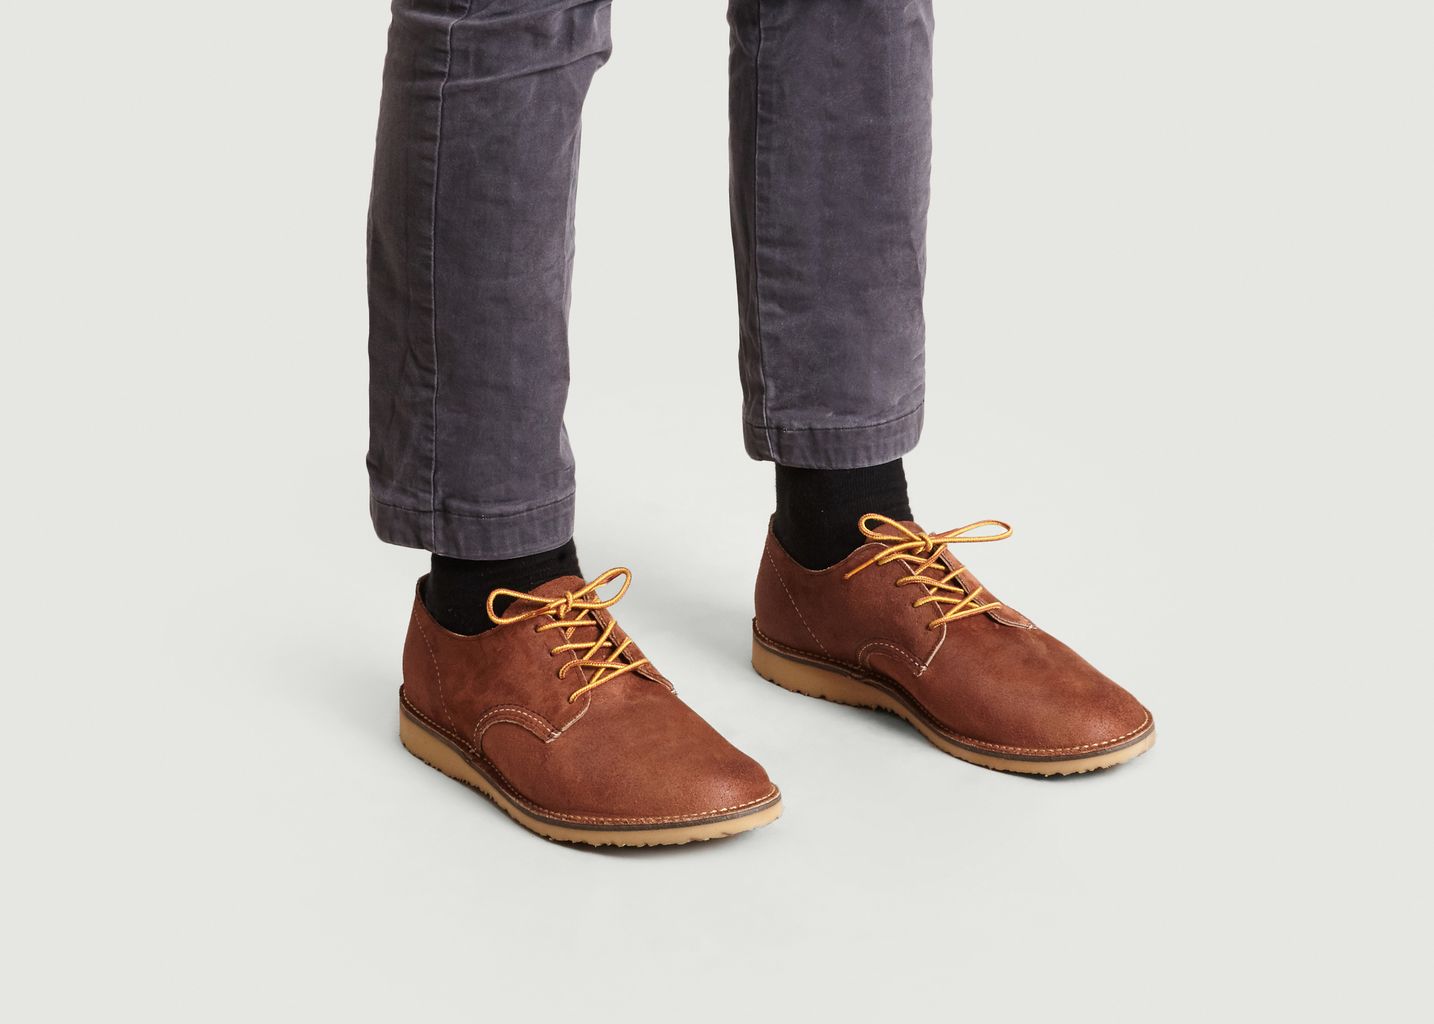 Weekender Oxford - Red Wing Shoes